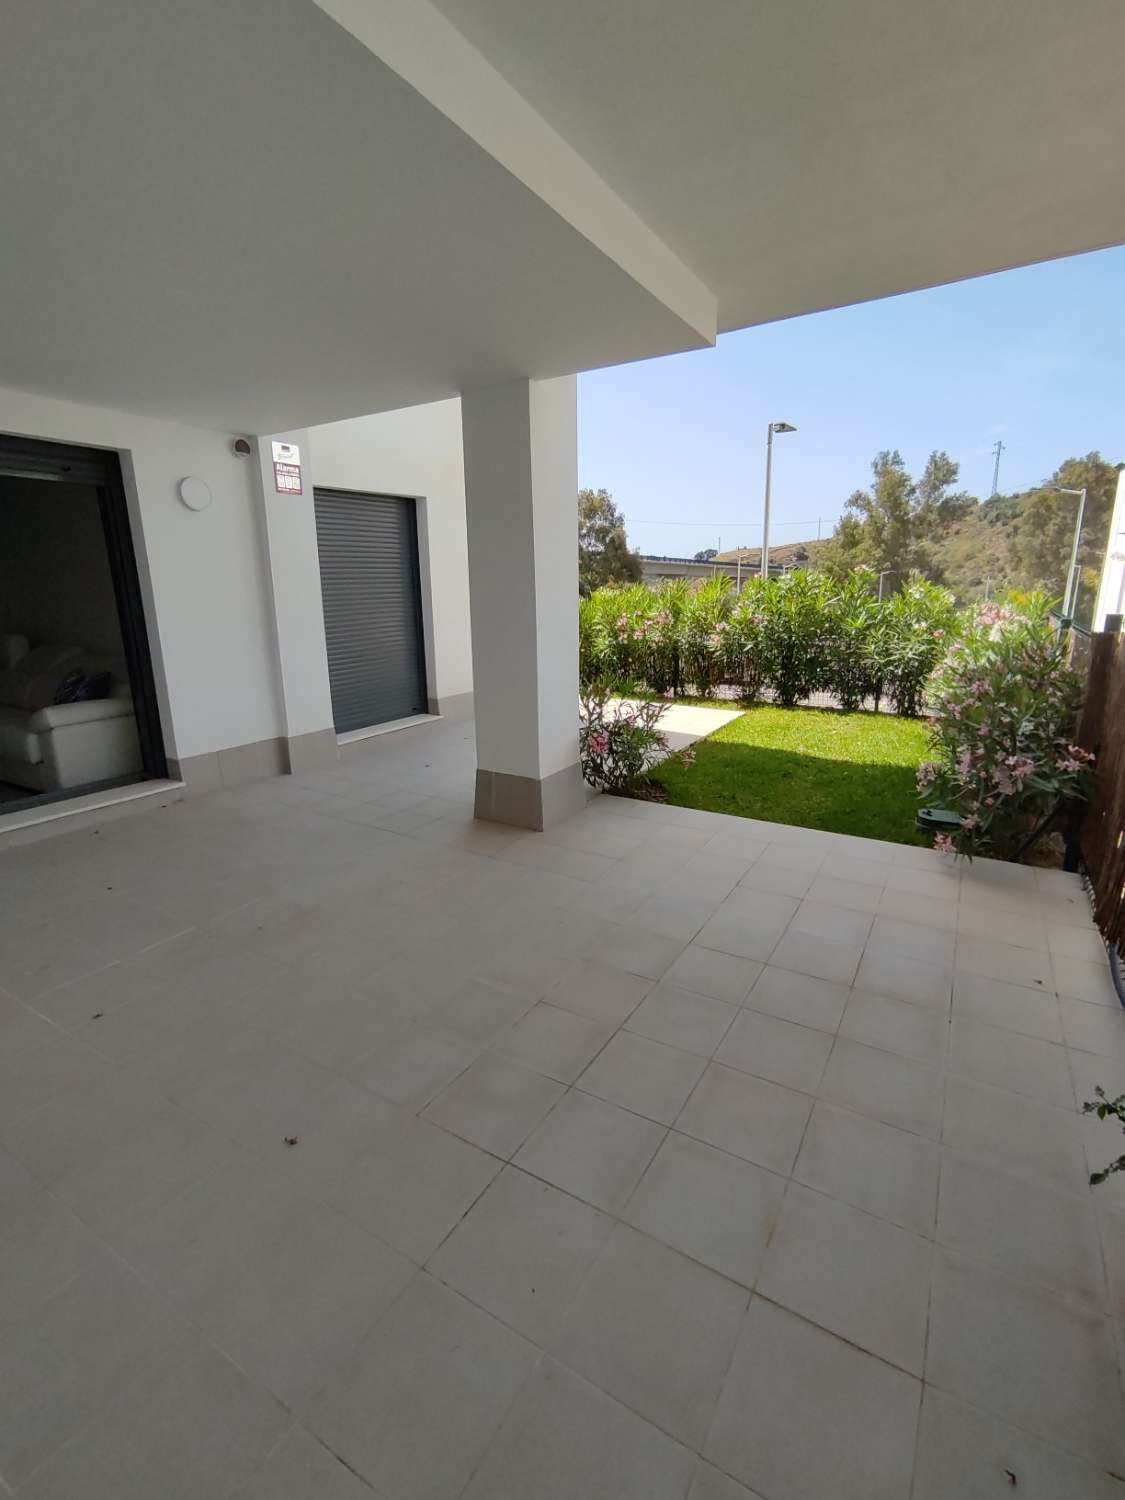 La cala, beautiful ground floor apartment with private terrace and landscaped garden of over 70m.  There are 3 double bedrooms,